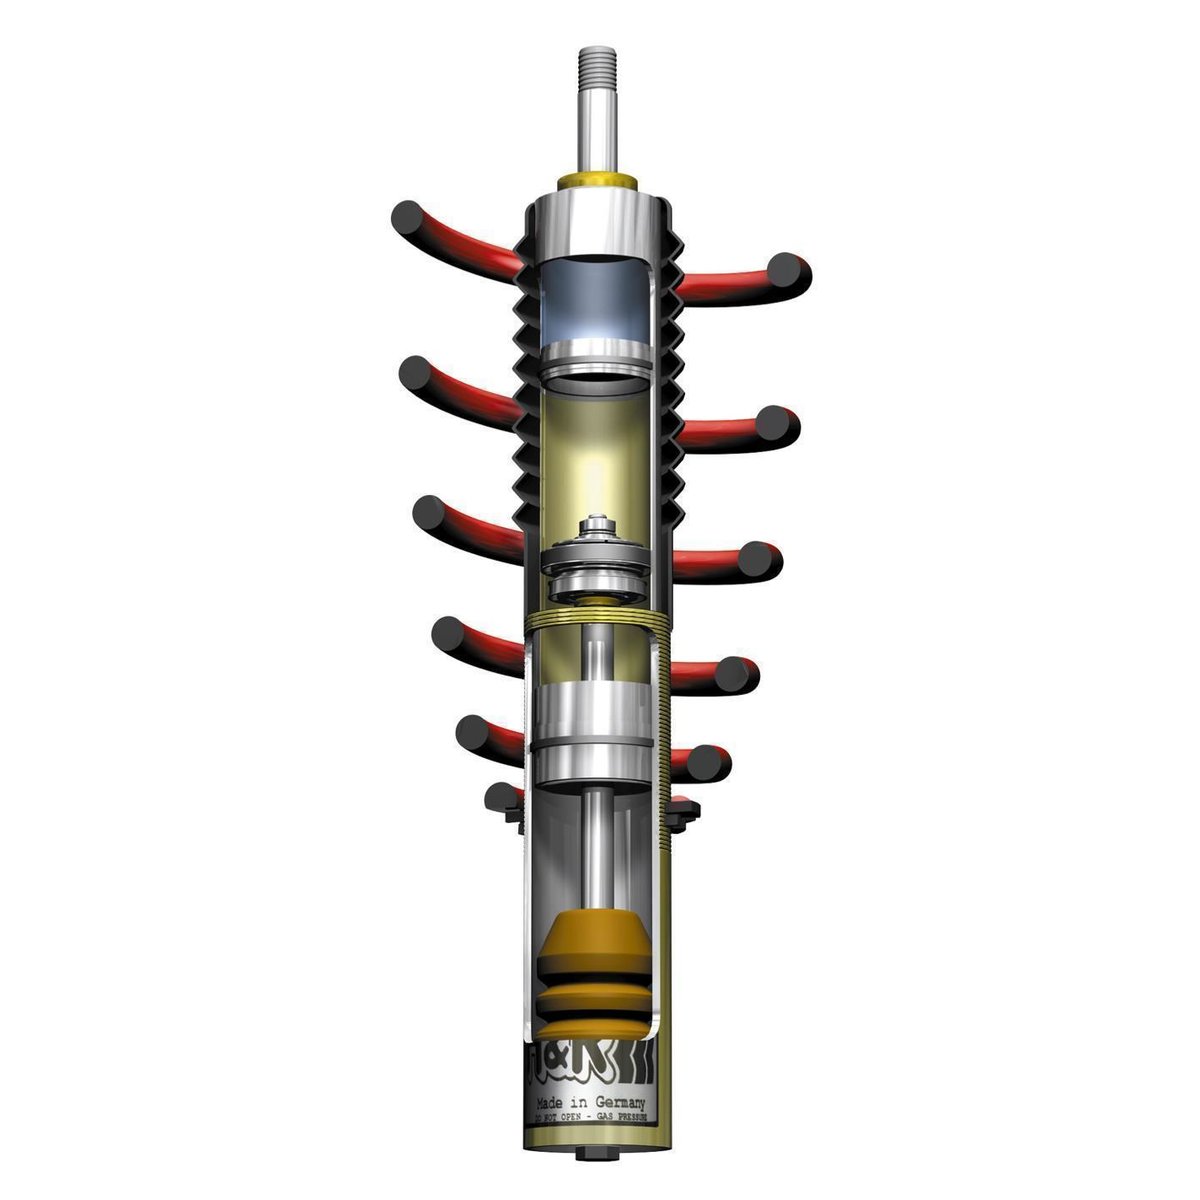 H&R Monotube coilover set Zafira-A incl. OPC Typ T98 MONOCAB 2WD